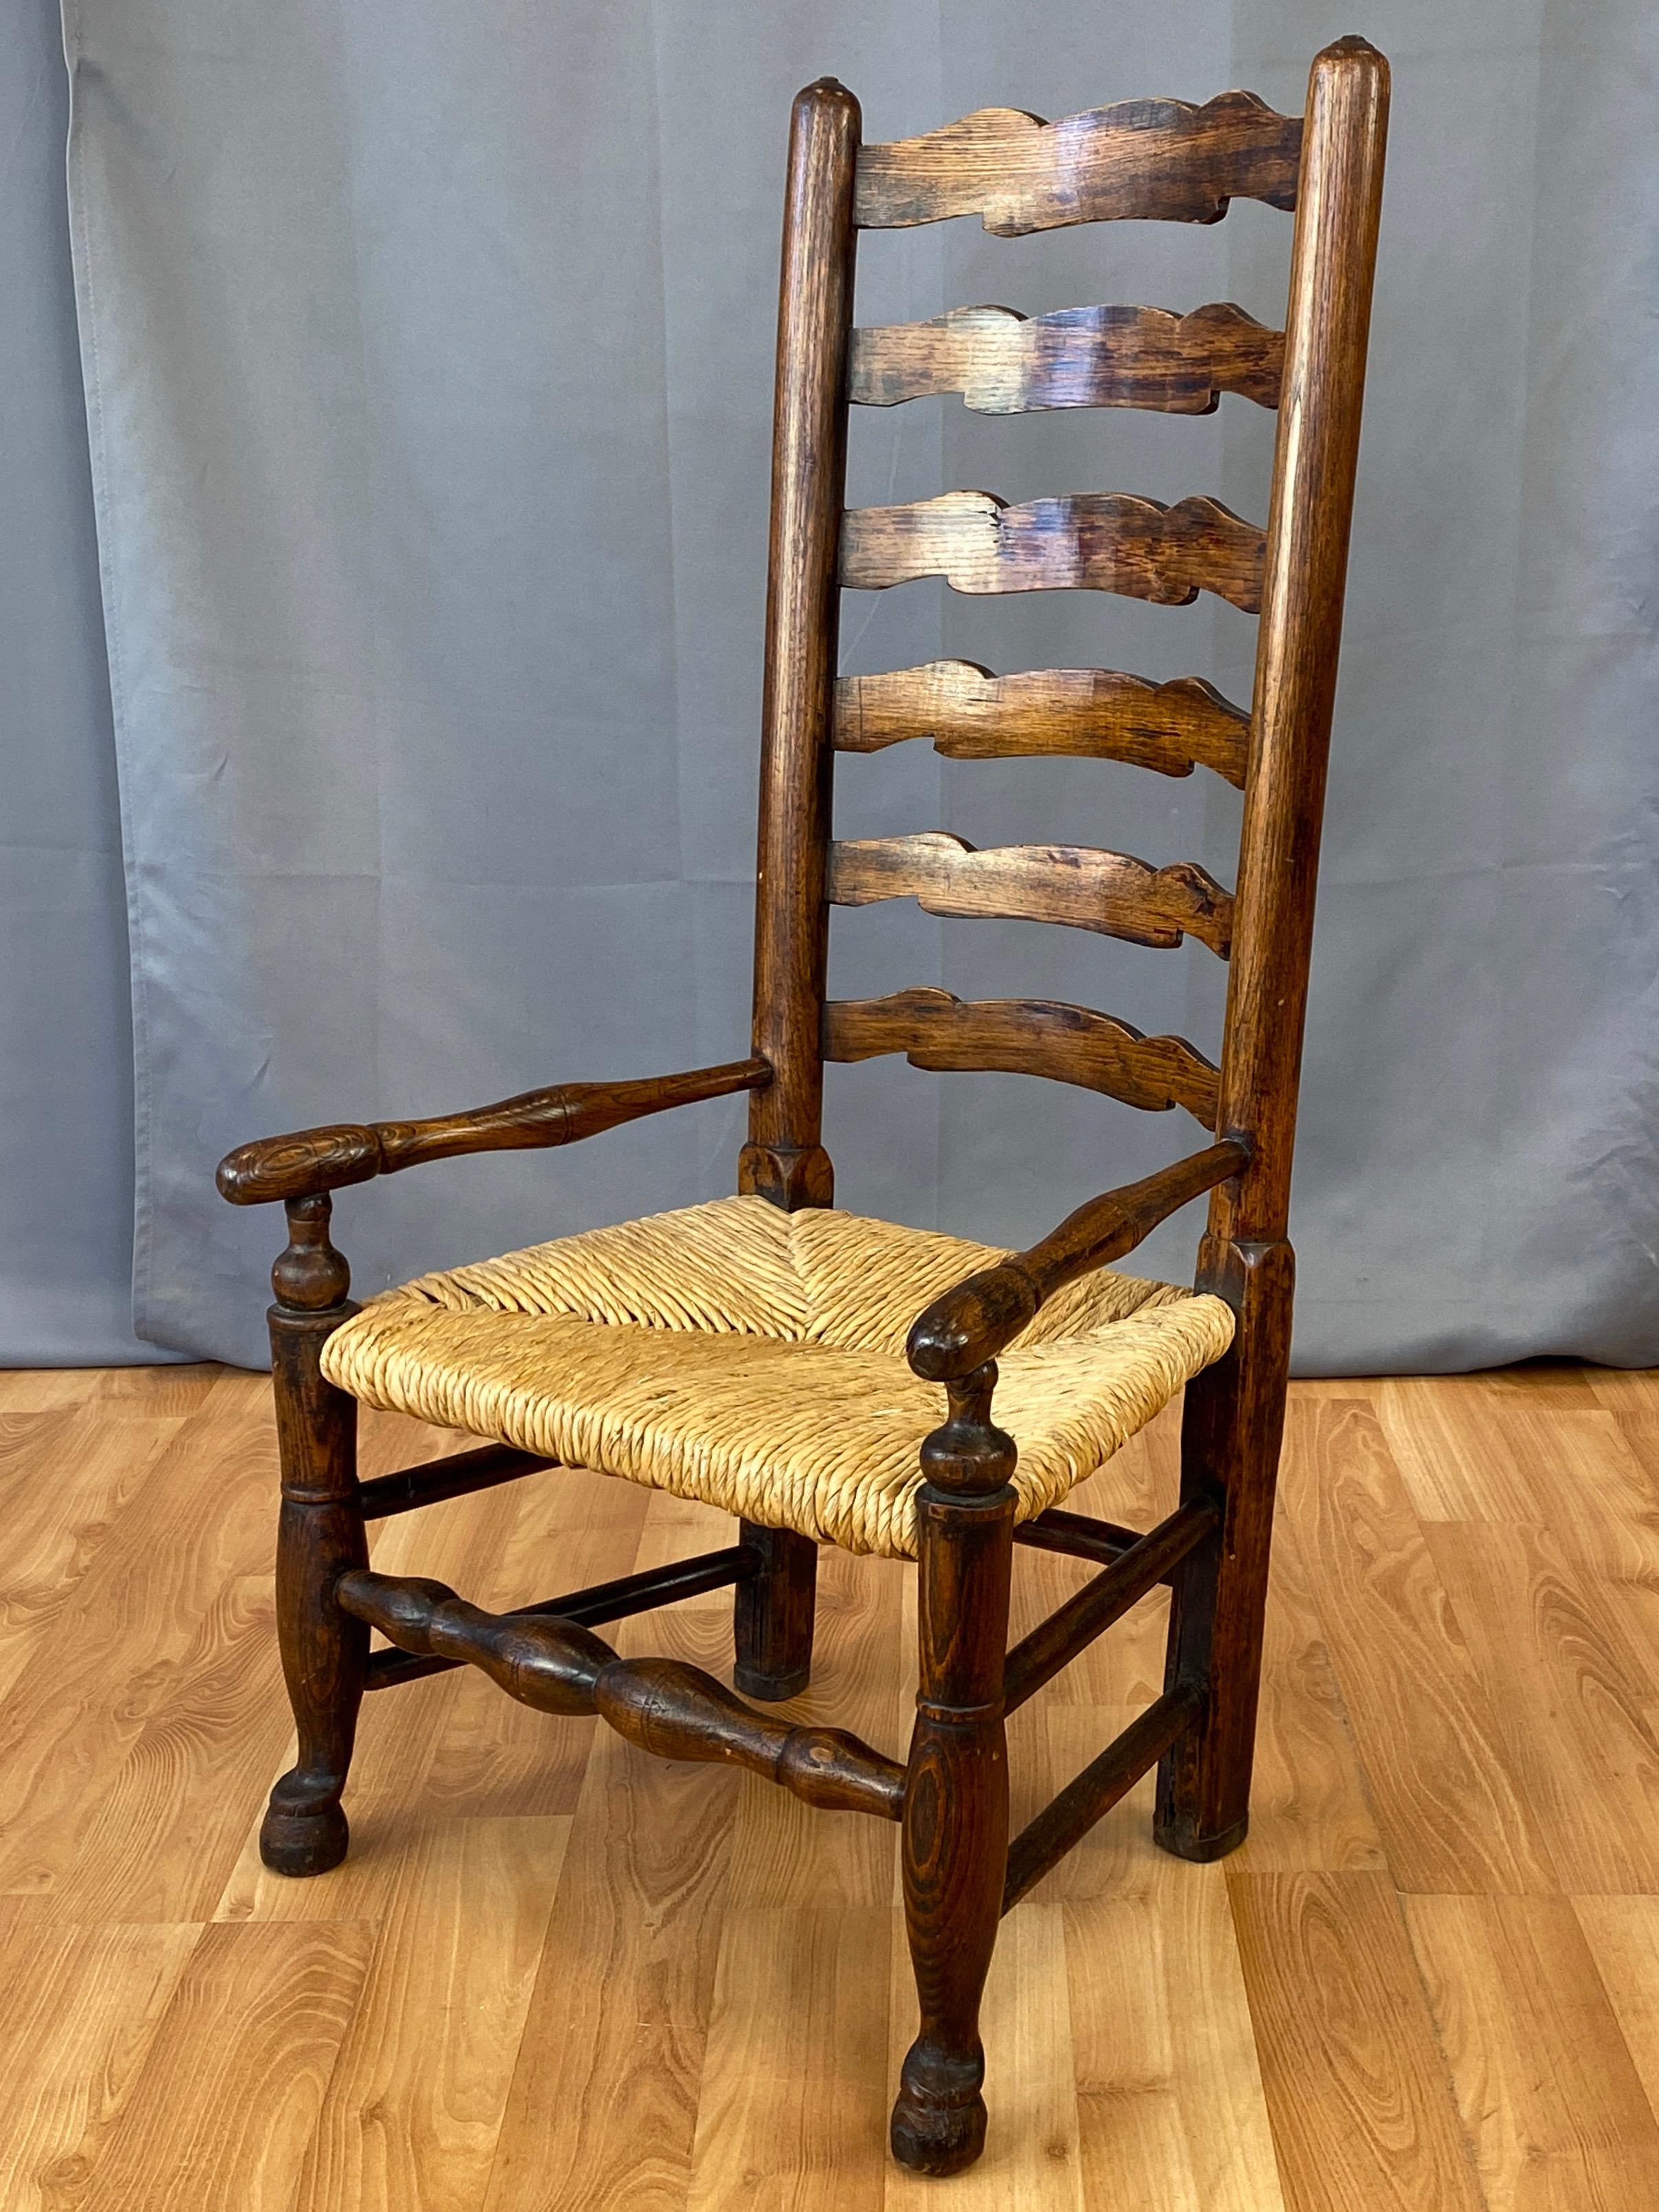 An uncommon circa 1800 English Georgian period country ladderback fireside armchair in elm with woven rush seat.

Delightfully proportioned, with the tall six-slat back “towering” over the extra-low seat, and the frame having a laid-back profile.